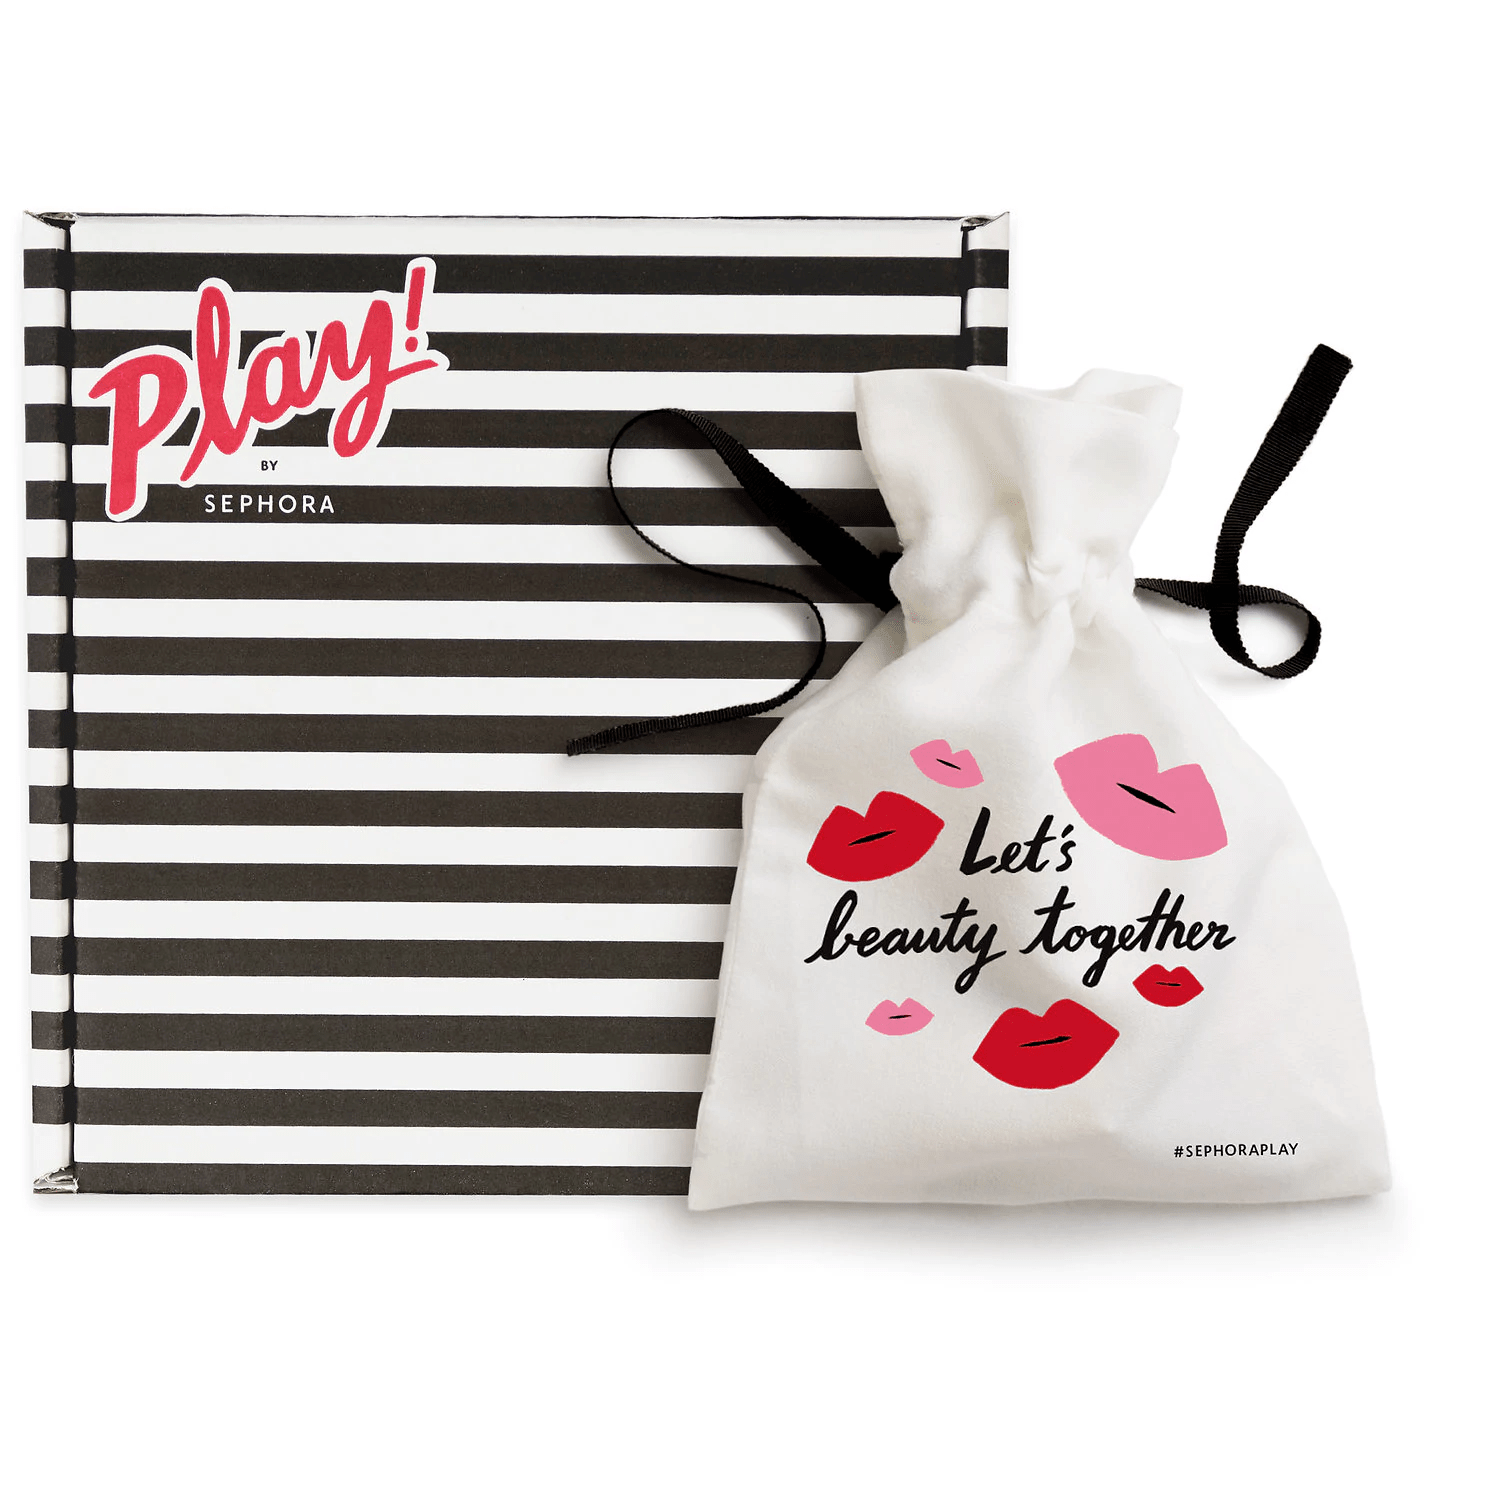 Play! by Sephora is a monthly beauty subscription box